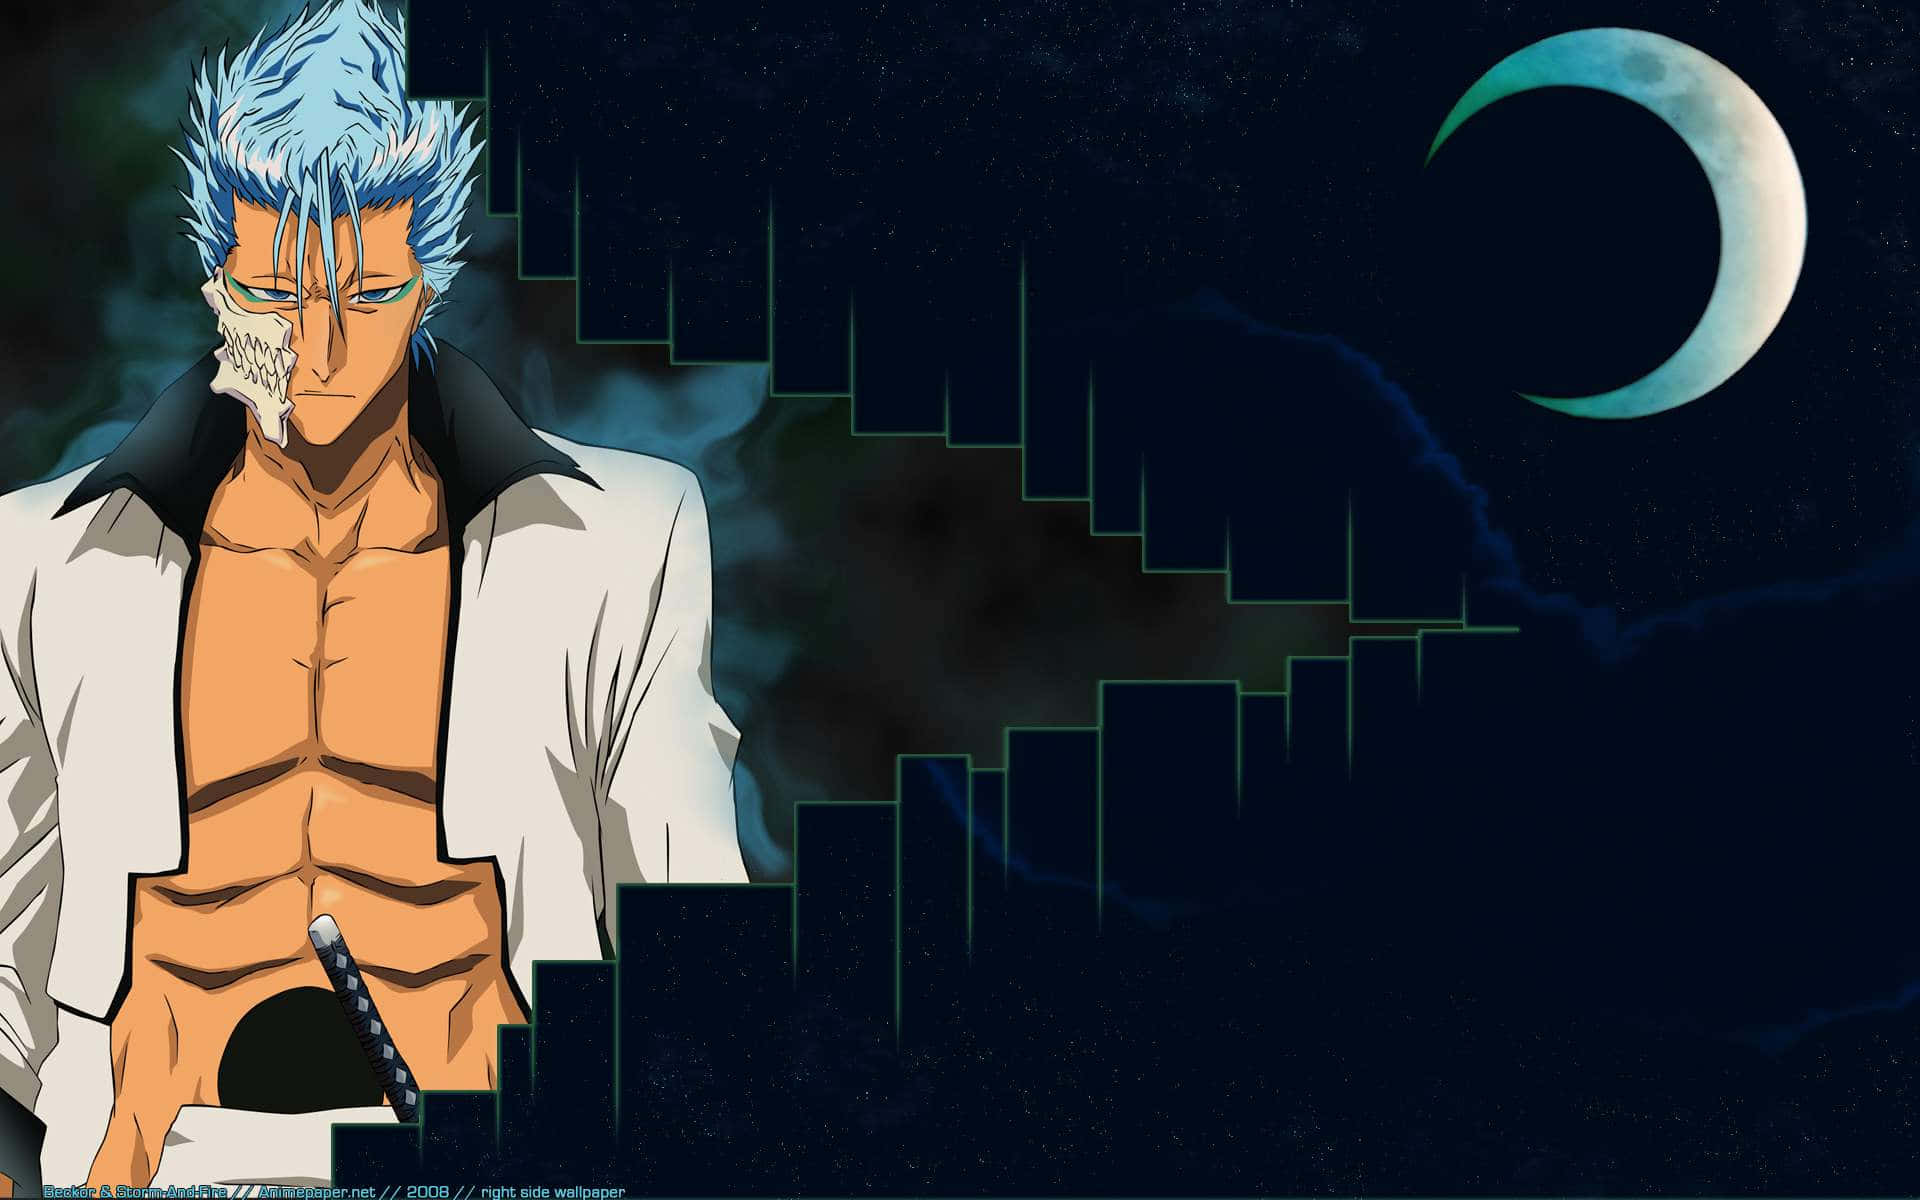 Grimmjow Jaegerjaquez brings his own style of power. Wallpaper